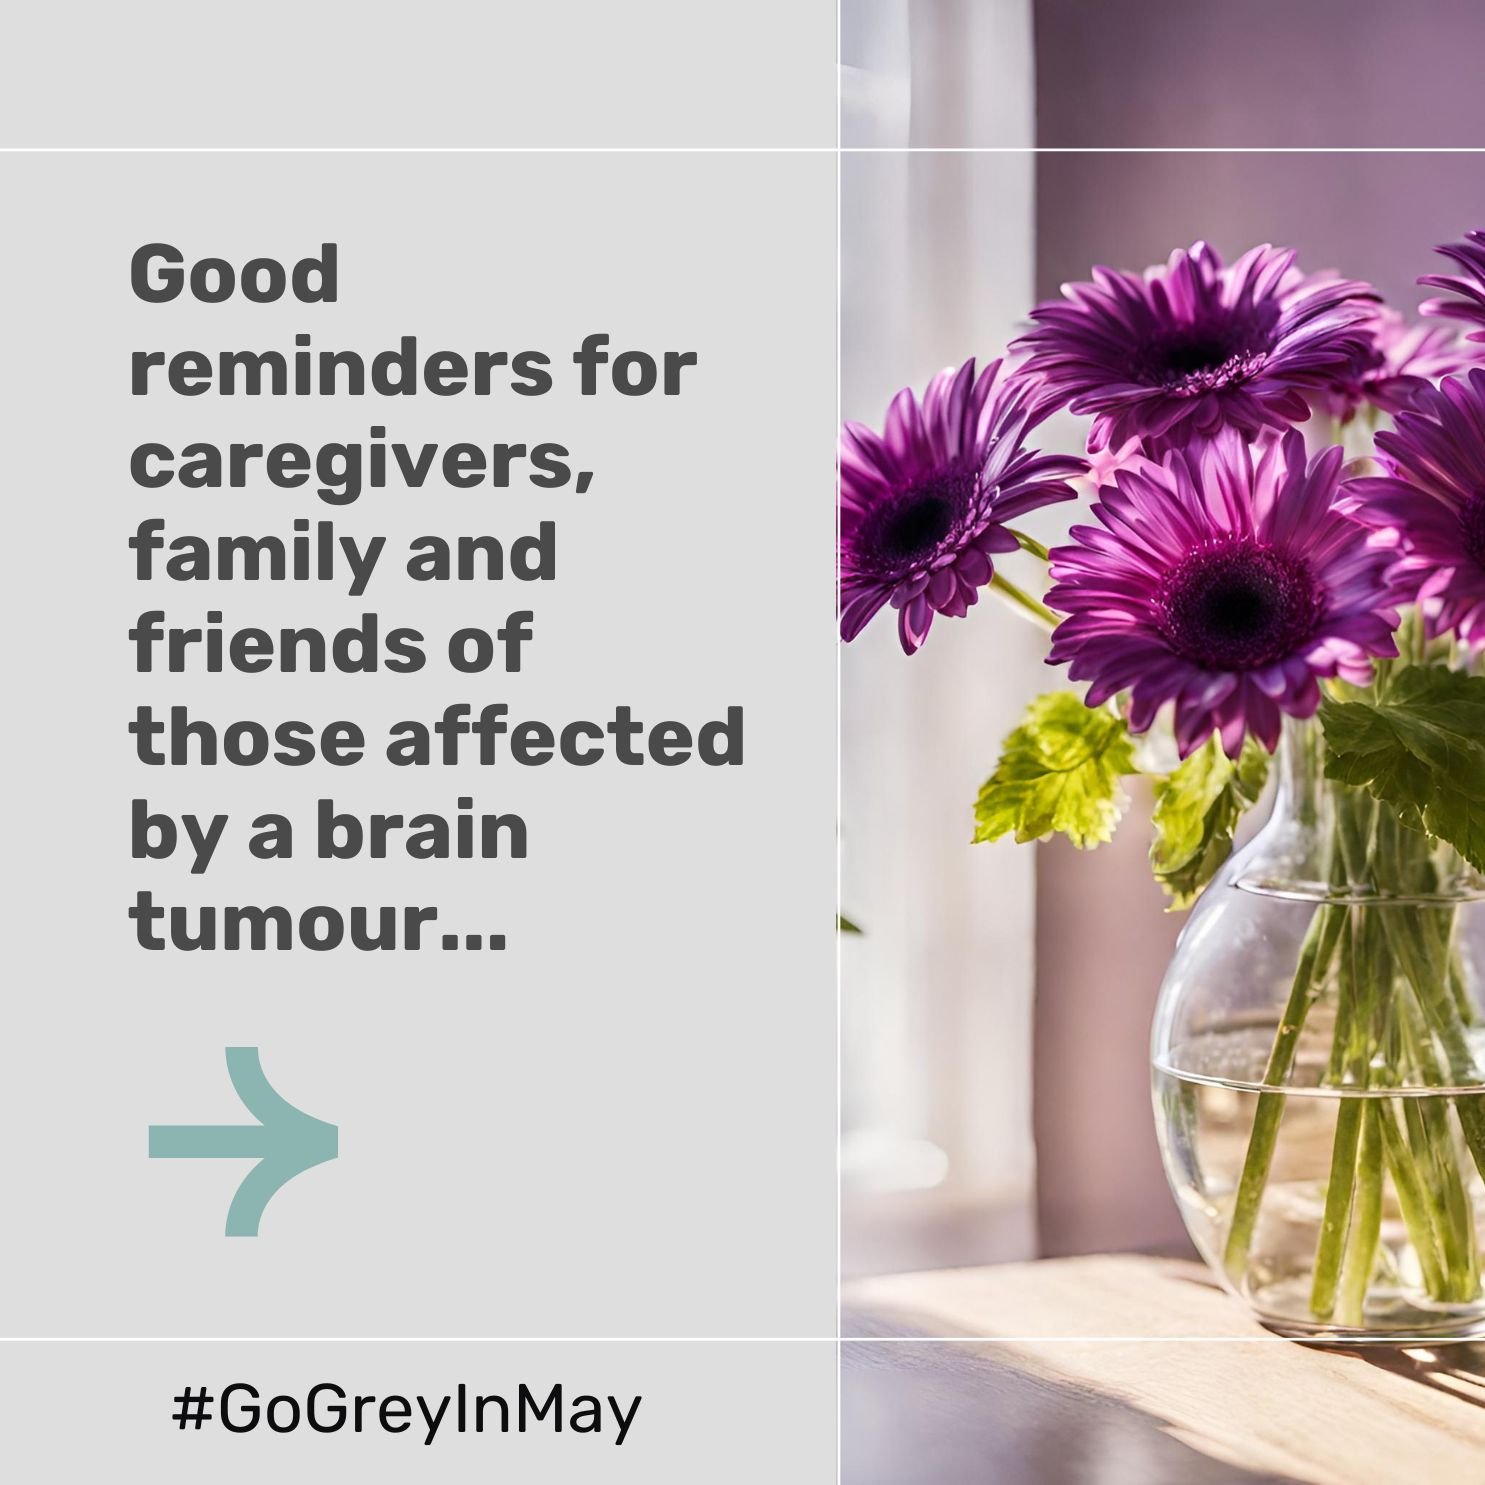 This May is #BrainCancerAwarenessMonth so we&rsquo;re sharing some good reminders for caregivers, family and friends of those affected by a brain tumour.

#GoGreyInMay for Peace of Mind Foundation this May to help fund vital support services for thos